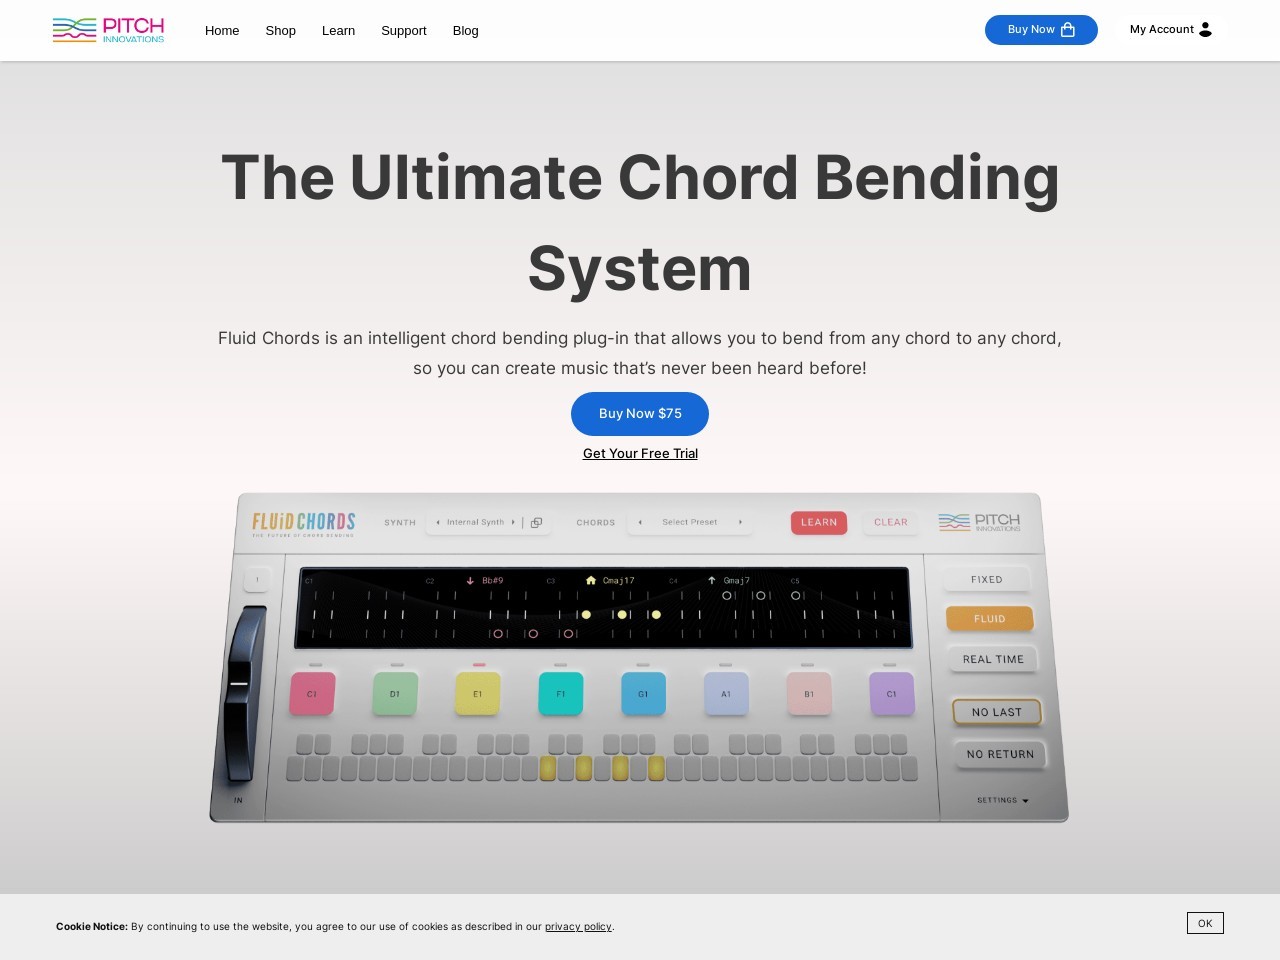 Fluid Chords - The Ultimate Chord Bending System | Pitch Innovations